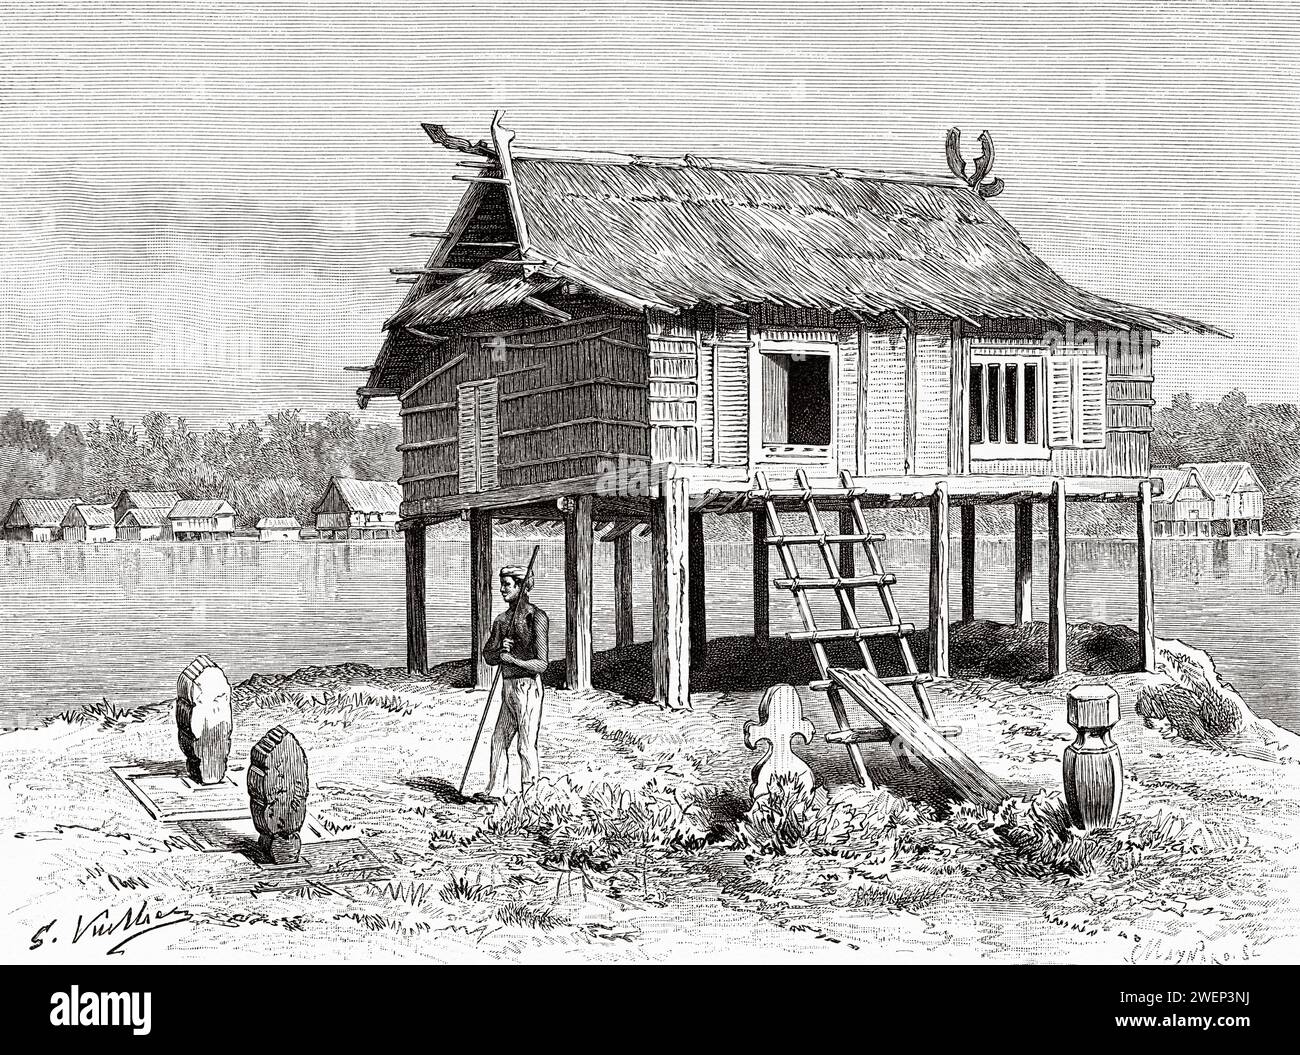 Traditional Malay dwelling in Samarinda, East Kalimantan. Borneo Island, Indonesia. From Koutei to Banjarmasin, a journey through Borneo by Carl Bock (1849 - 1932) Old 19th century engraving from Le Tour du Monde 1890 Stock Photo